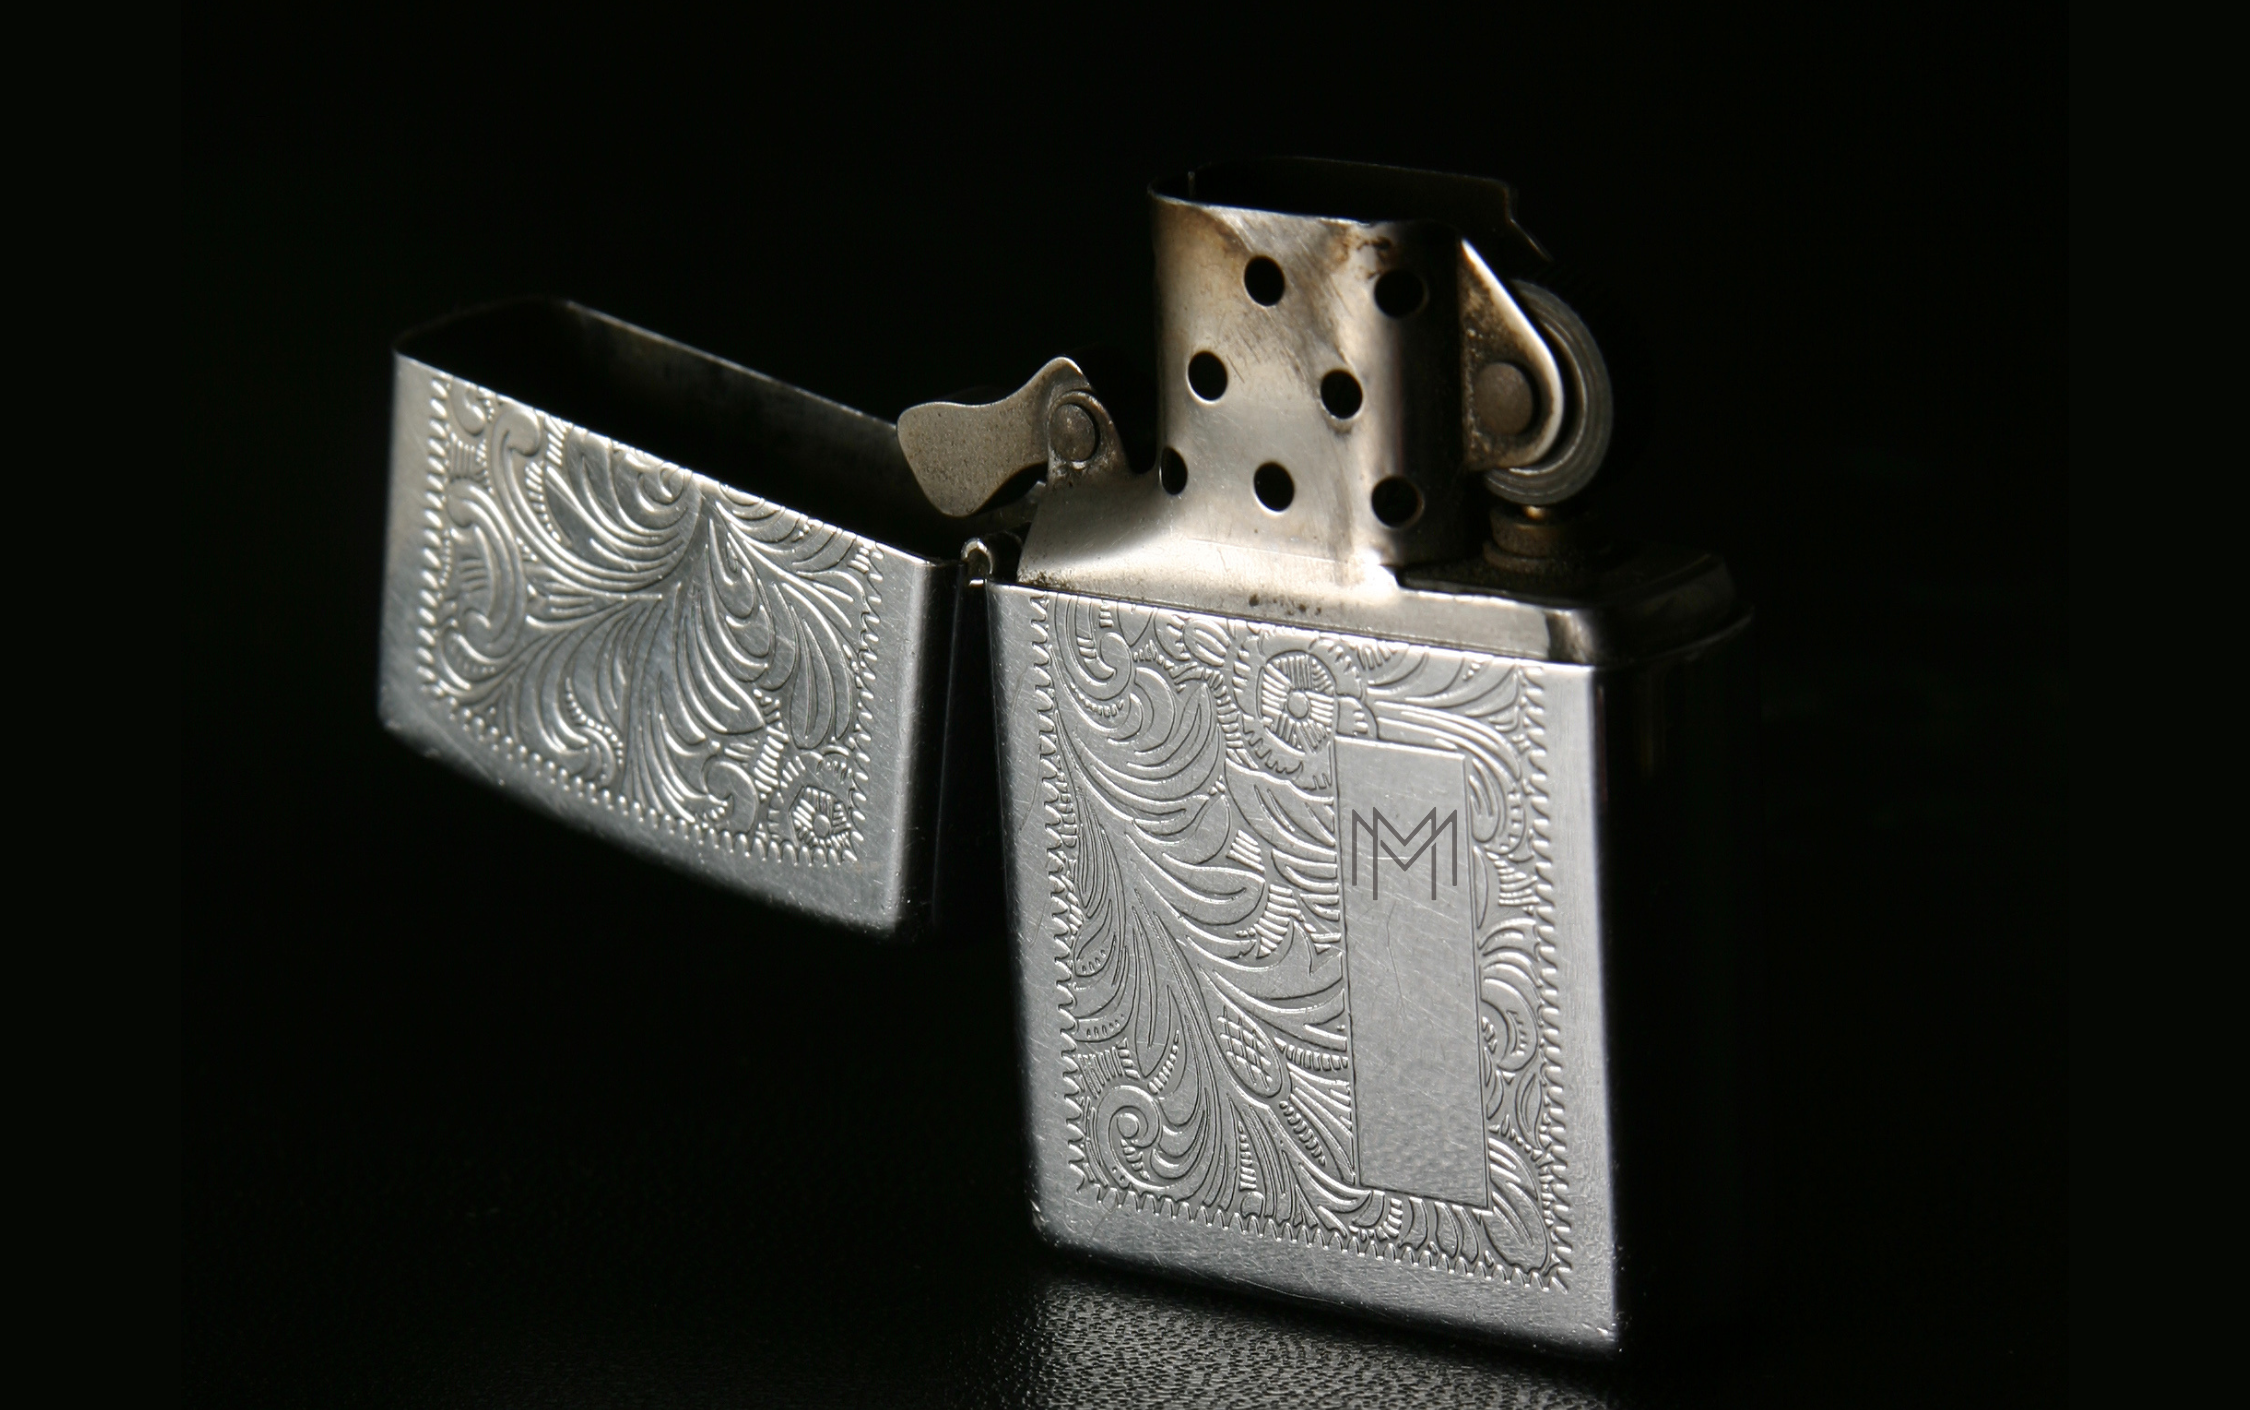 An image of engraved lighters